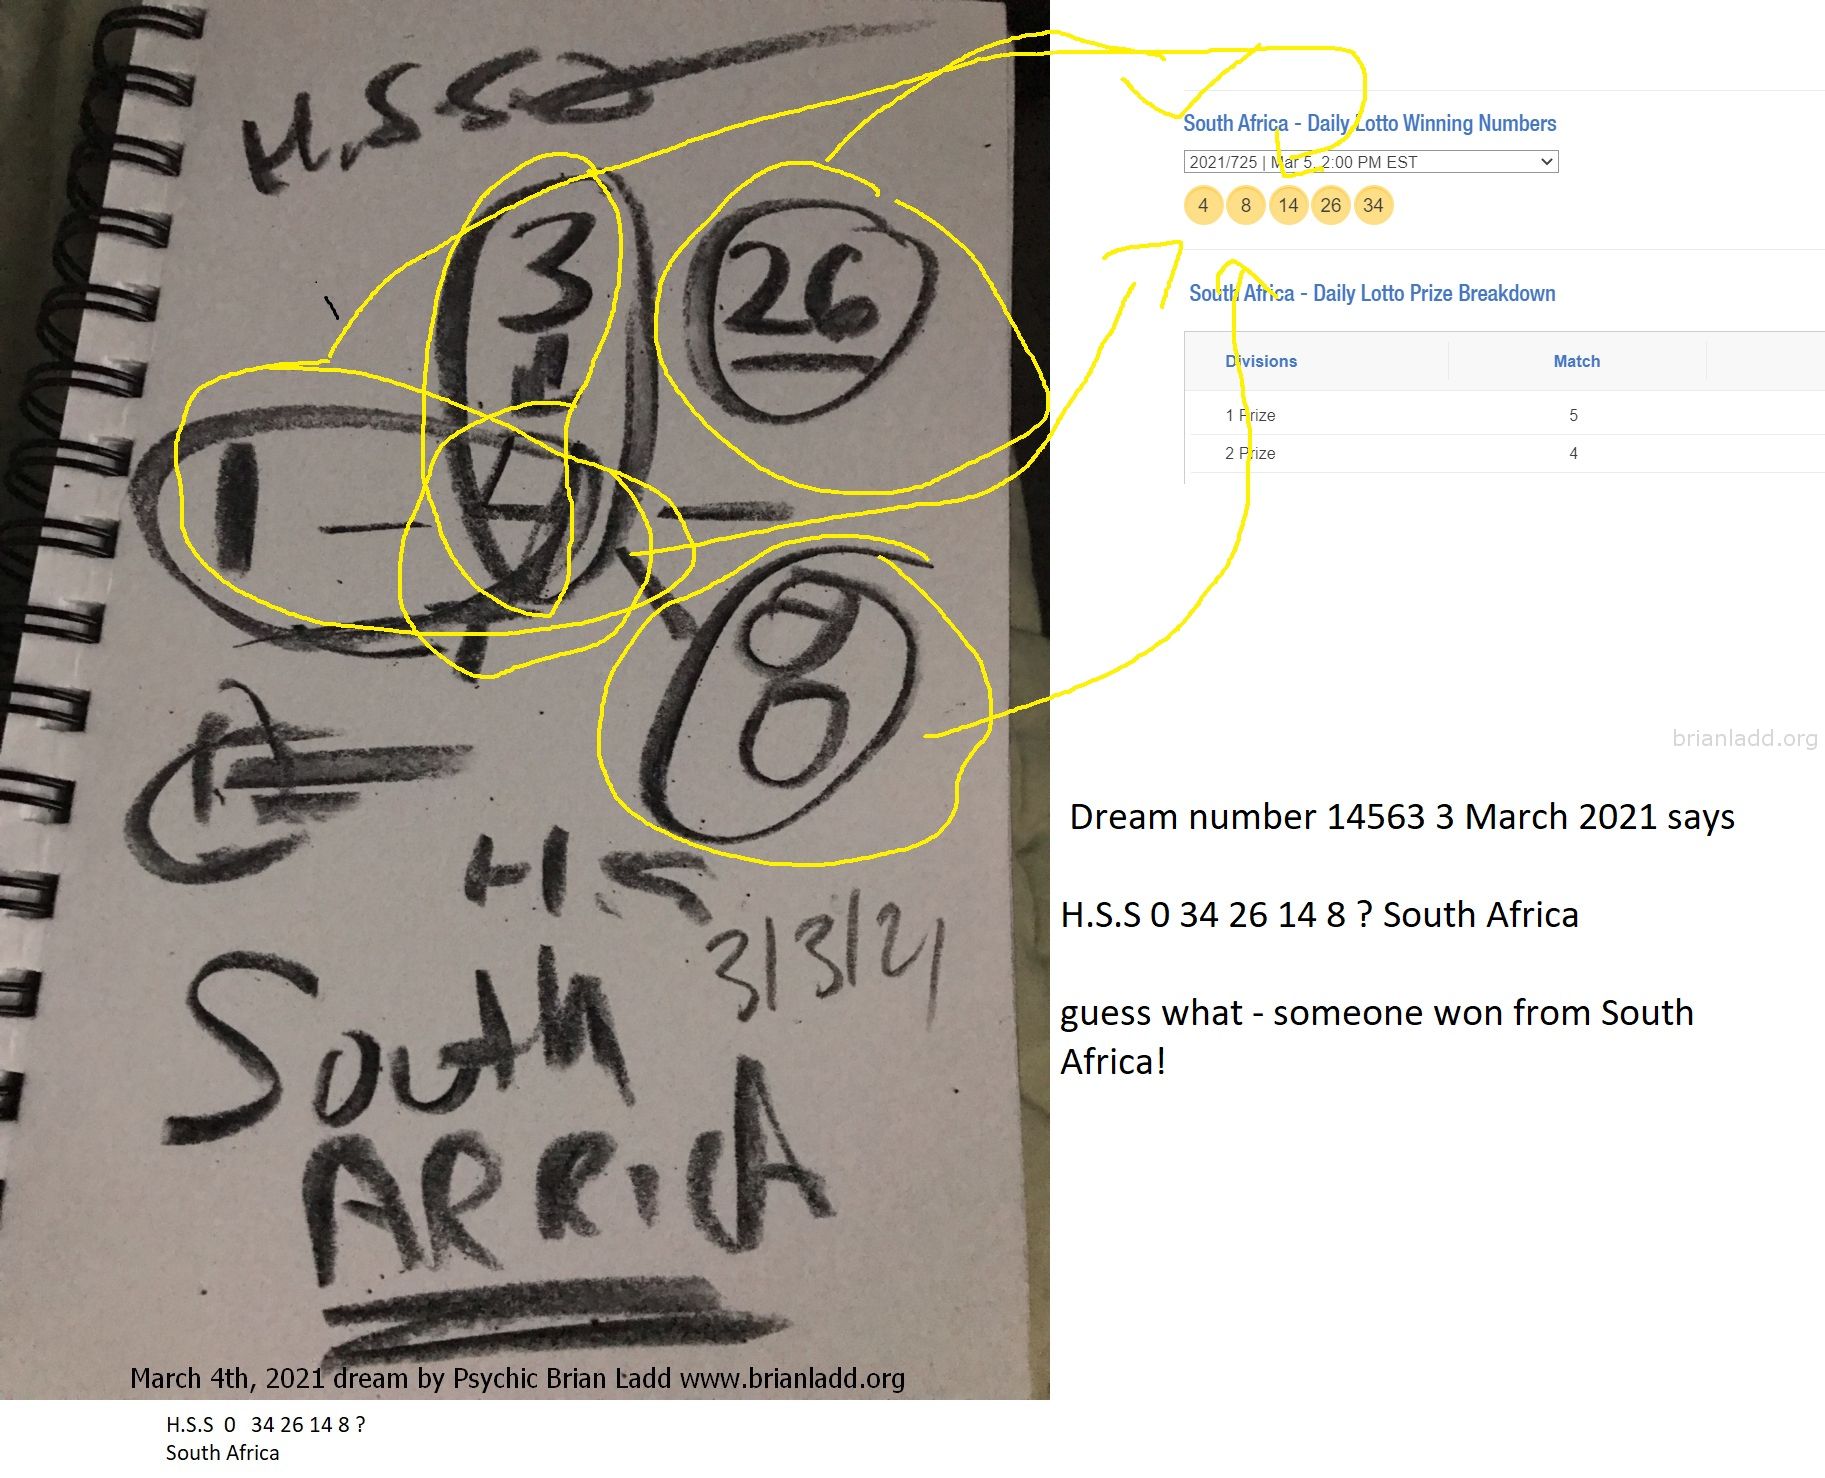 14563 3 March 2021 Says H S S 0 34 26 14 8 South Africa Guess What Someone Won From South Africa - Dream Number 14563 3 ...
Dream Number 14563 3 March 2021 Says  H.S.S 0 34 26 14 8 ? South Africa  Guess What - Someone Won From South Africa!  More At   https://briansprediction.com/Thumbnails.Php?Album=2907
